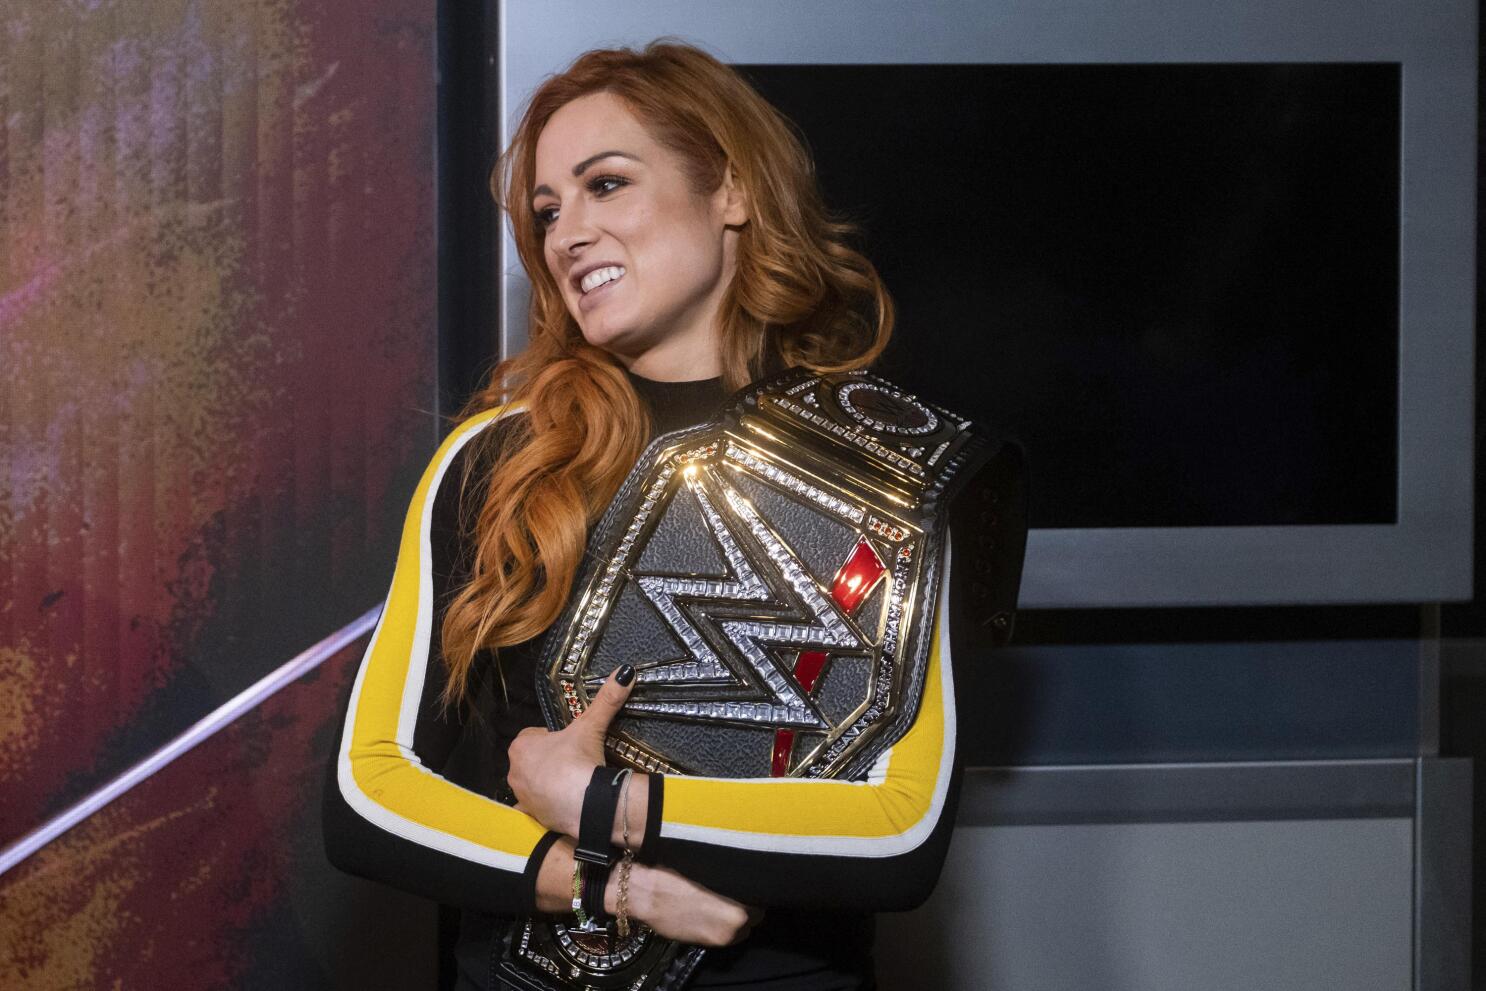 When Is Becky Lynch's Due Date? The WWE Superstar Is Taking Time Off